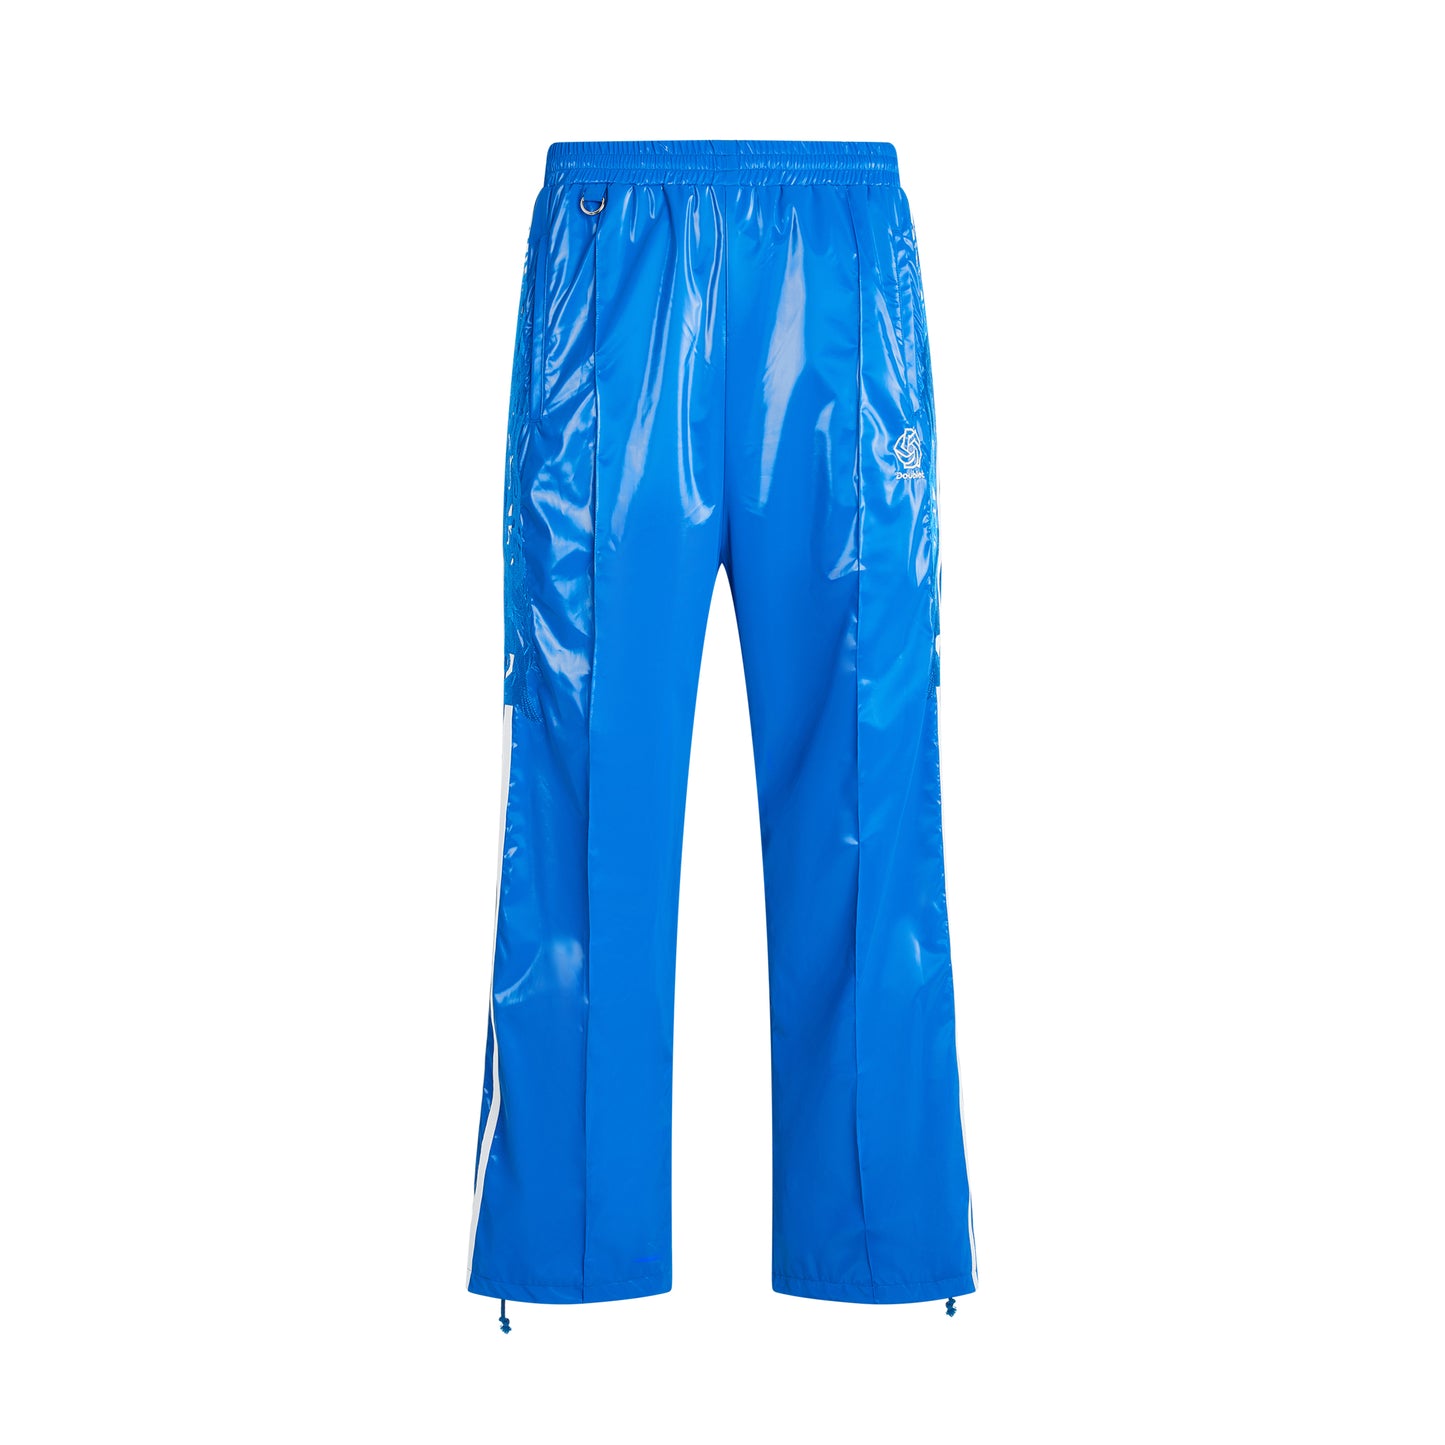 Laminate Track Pants in Blue